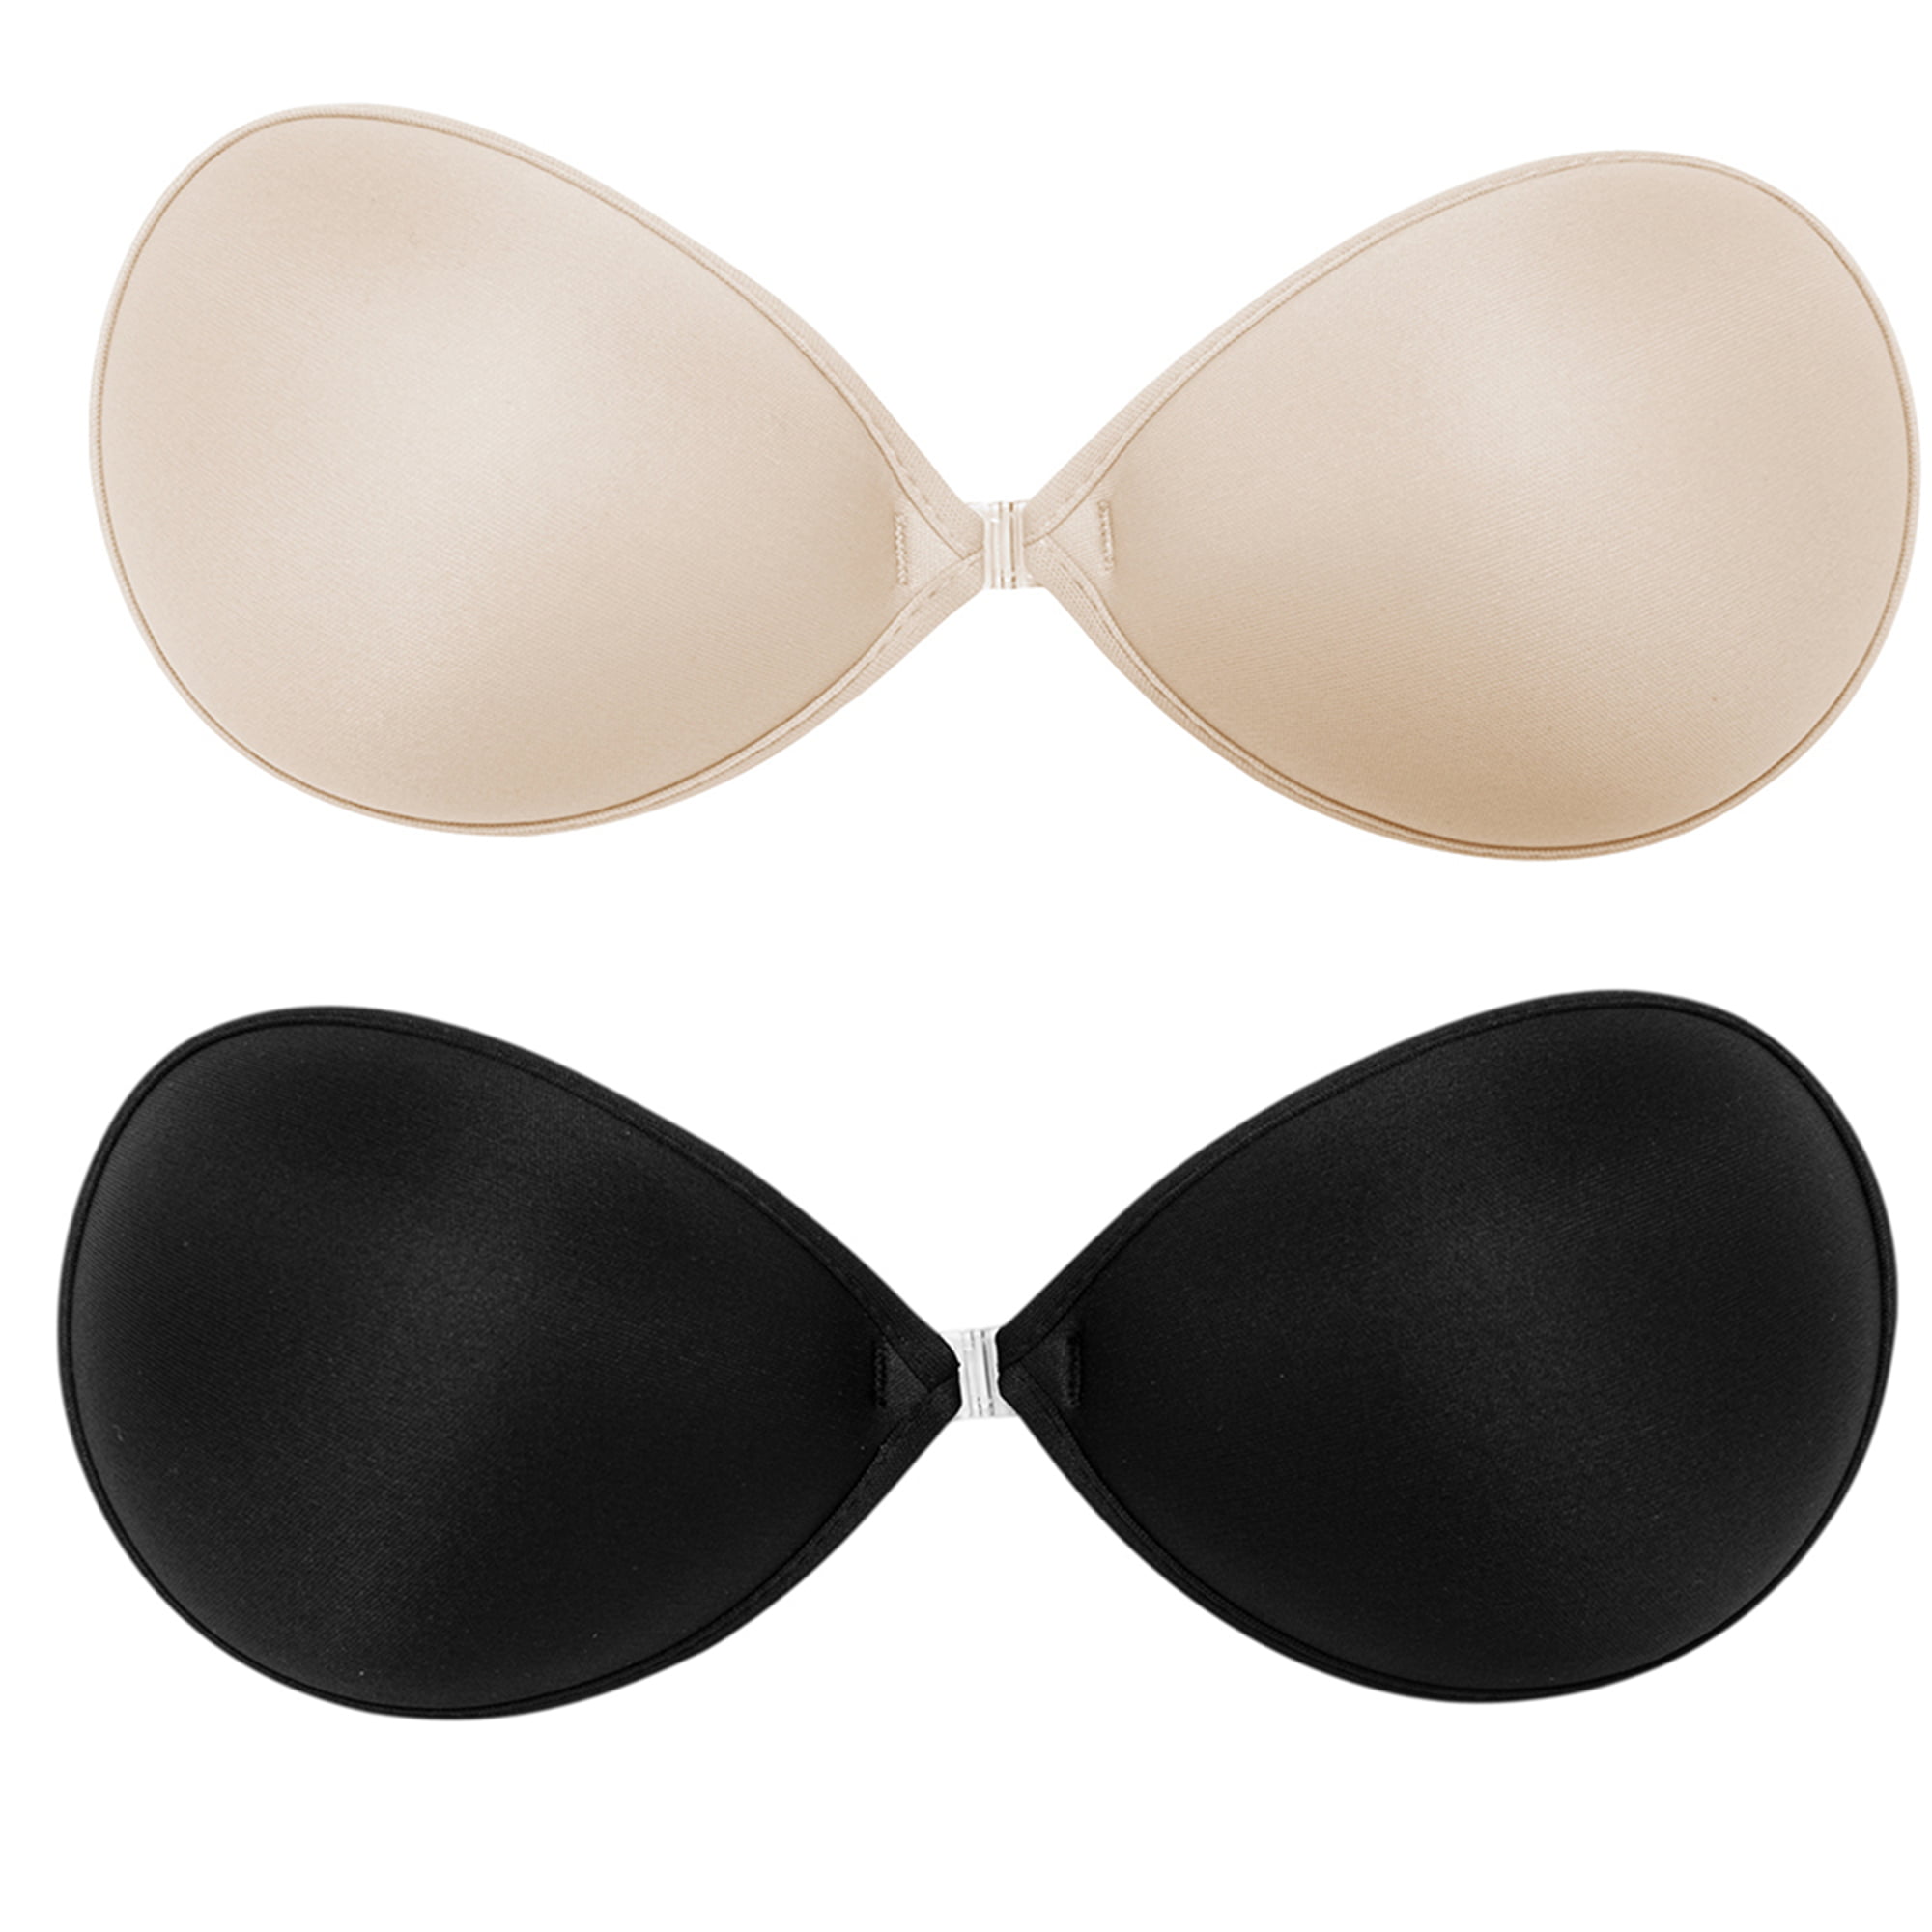 Adhesive Silicone Bra Strapless Backless Reusable Push-up Bra Wing